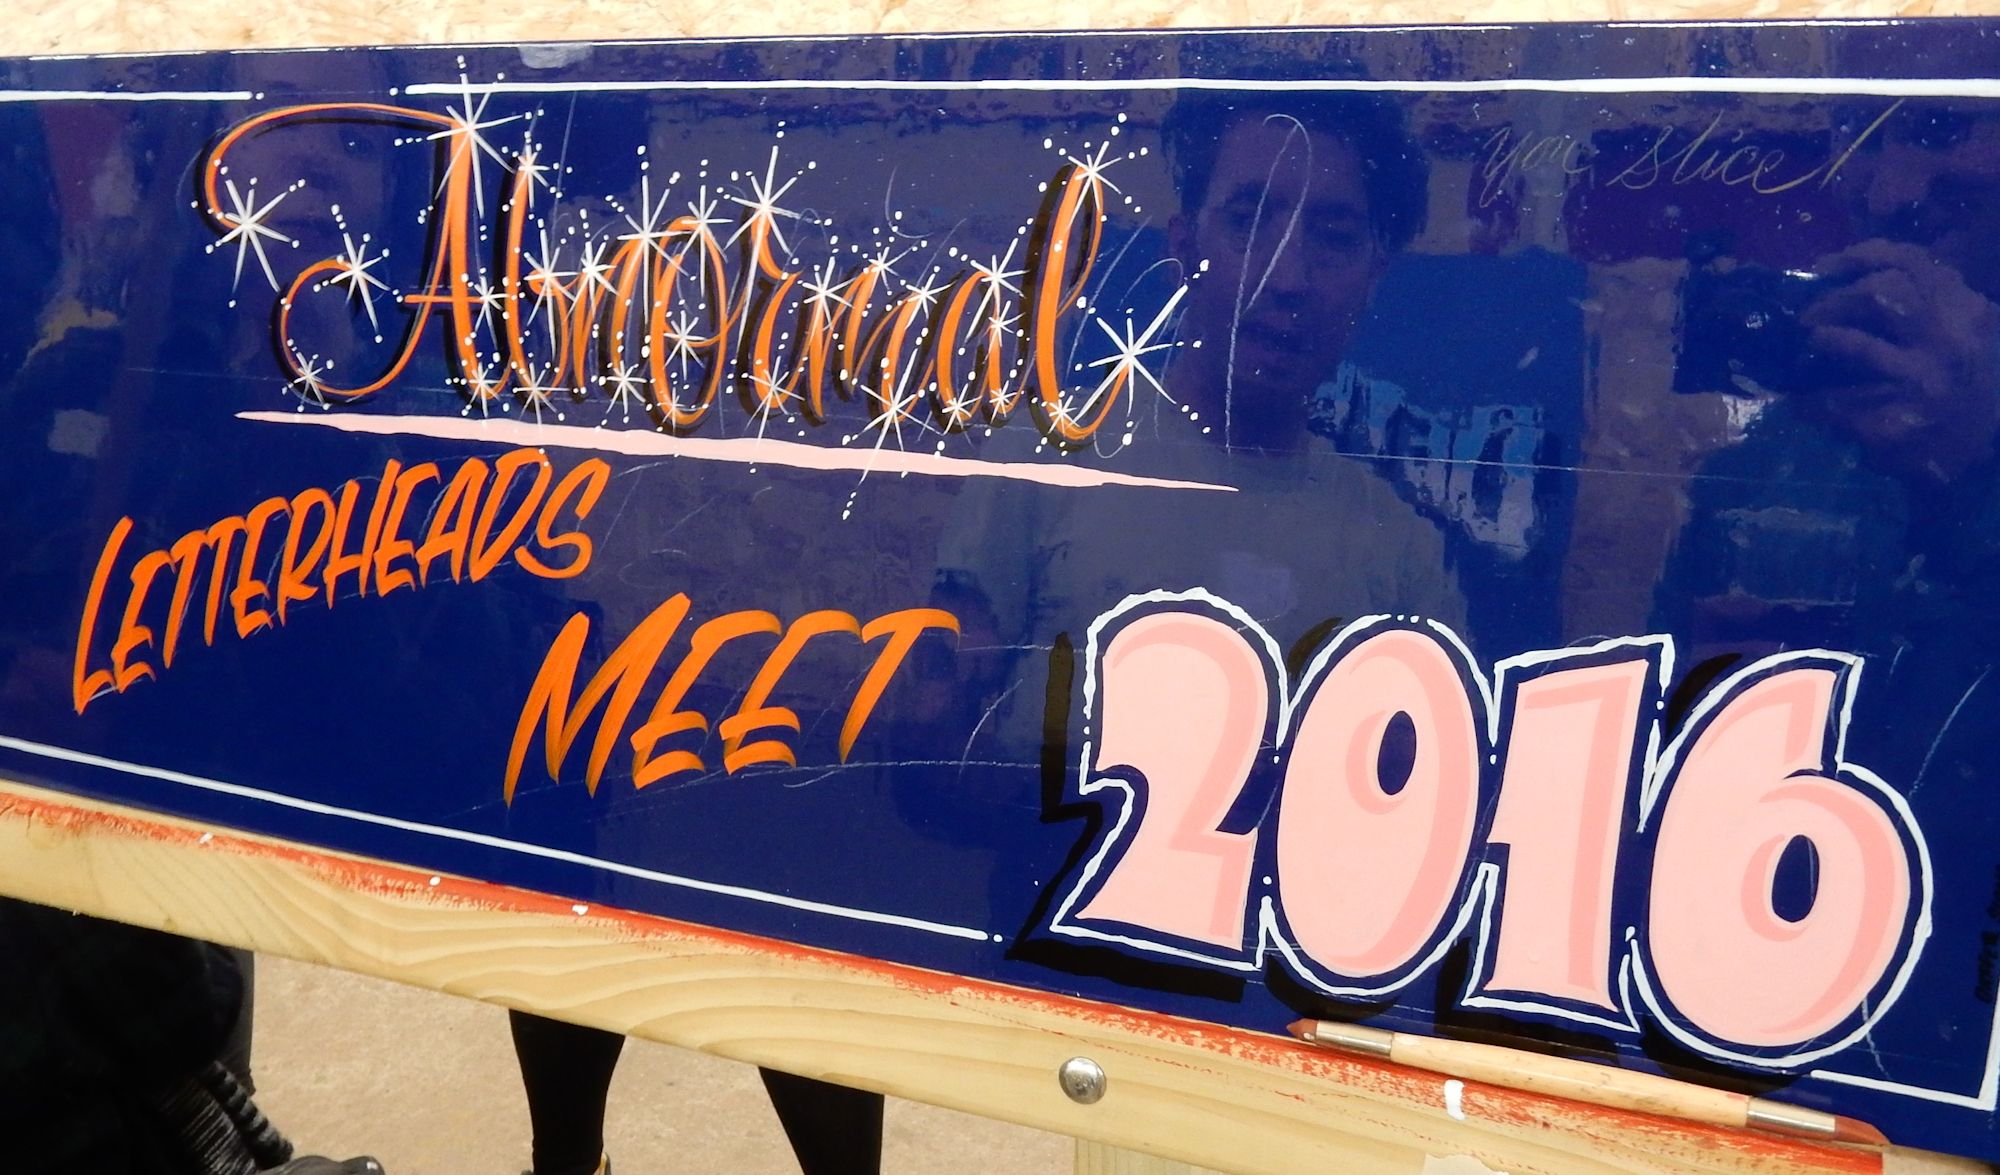 Hand-painted panel with lettering that reads "Abnormal Letterheads Meet, 2016".